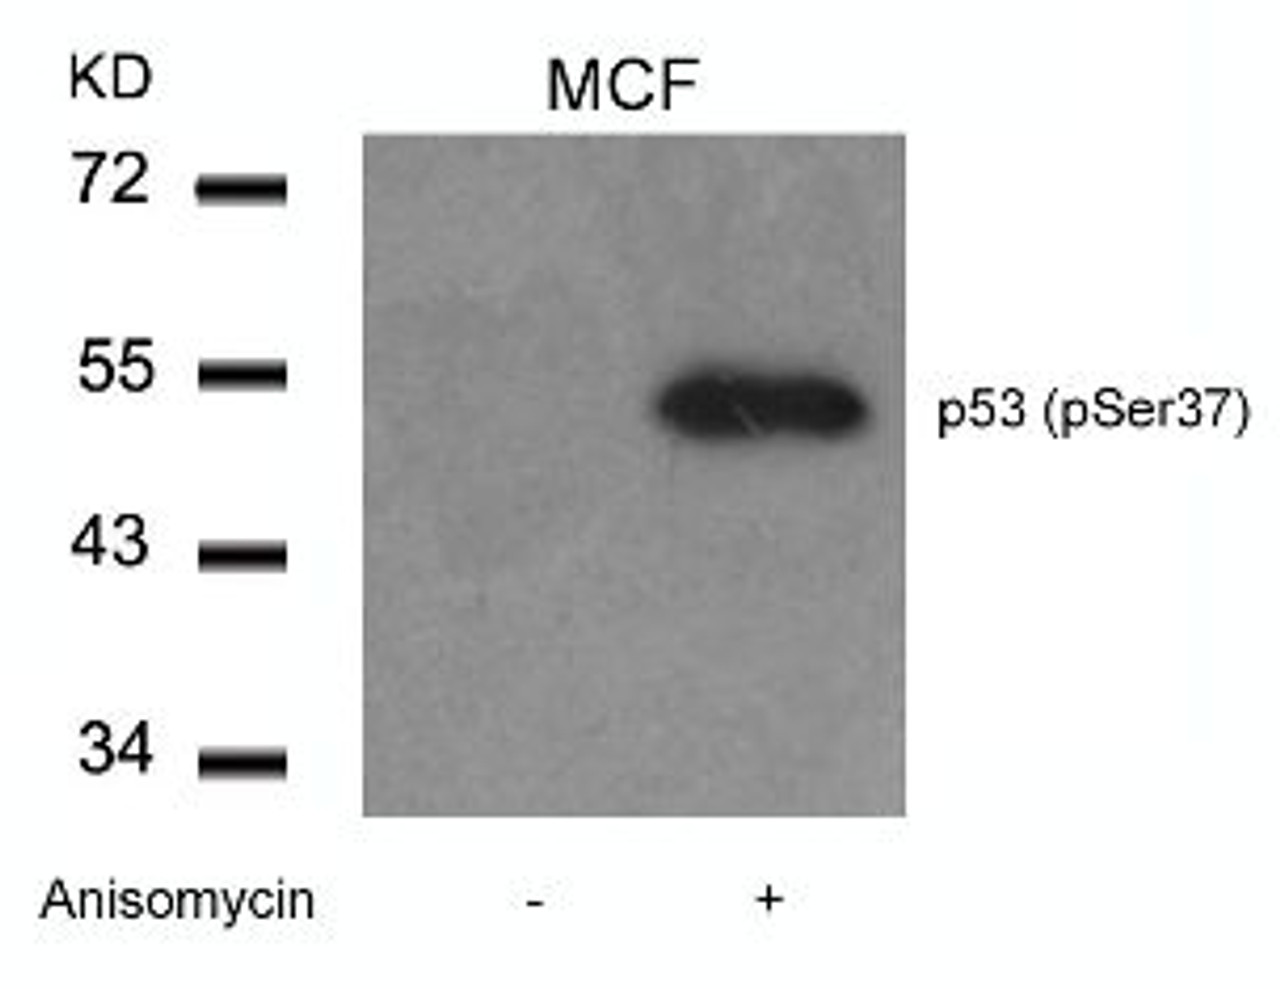 Western blot analysis of lysed extracts from MCF cells untreated or treated with Anisomycin using p53 (Phospho-Ser37) .